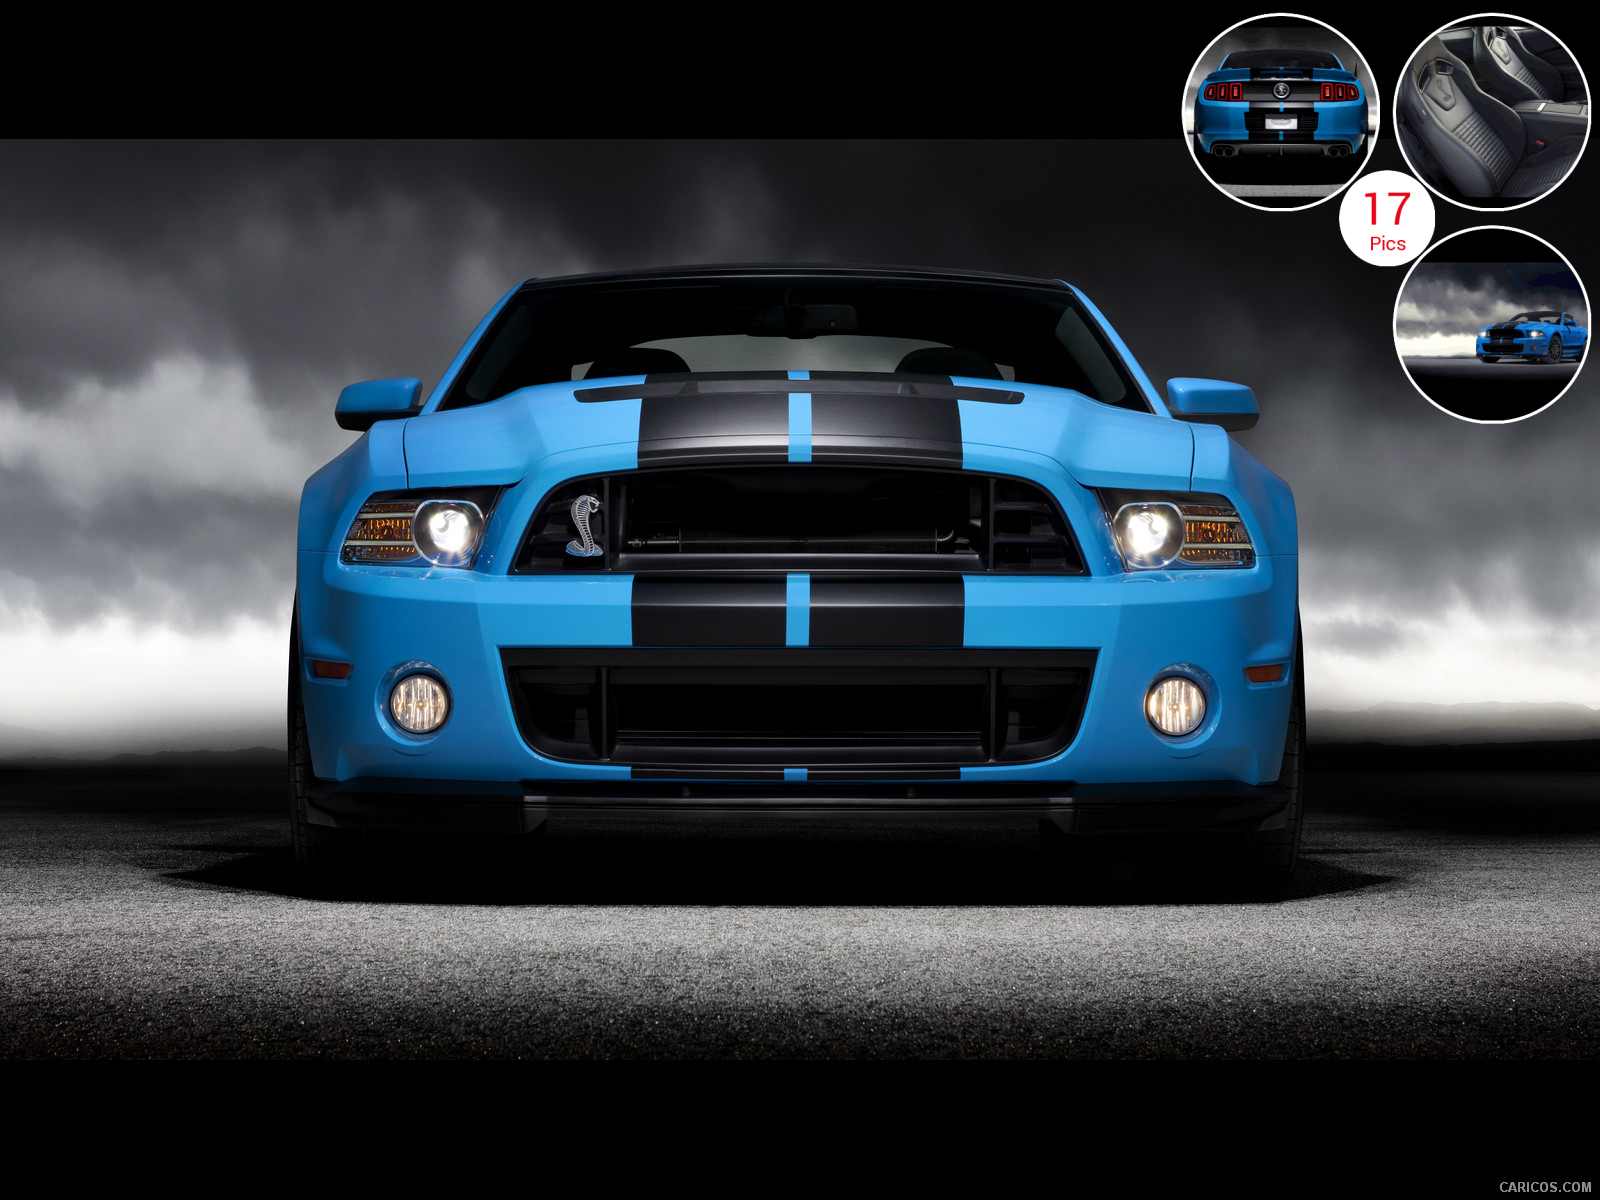 2013 Ford Mustang Shelby GT500 - Front Wallpaper 1600x1200